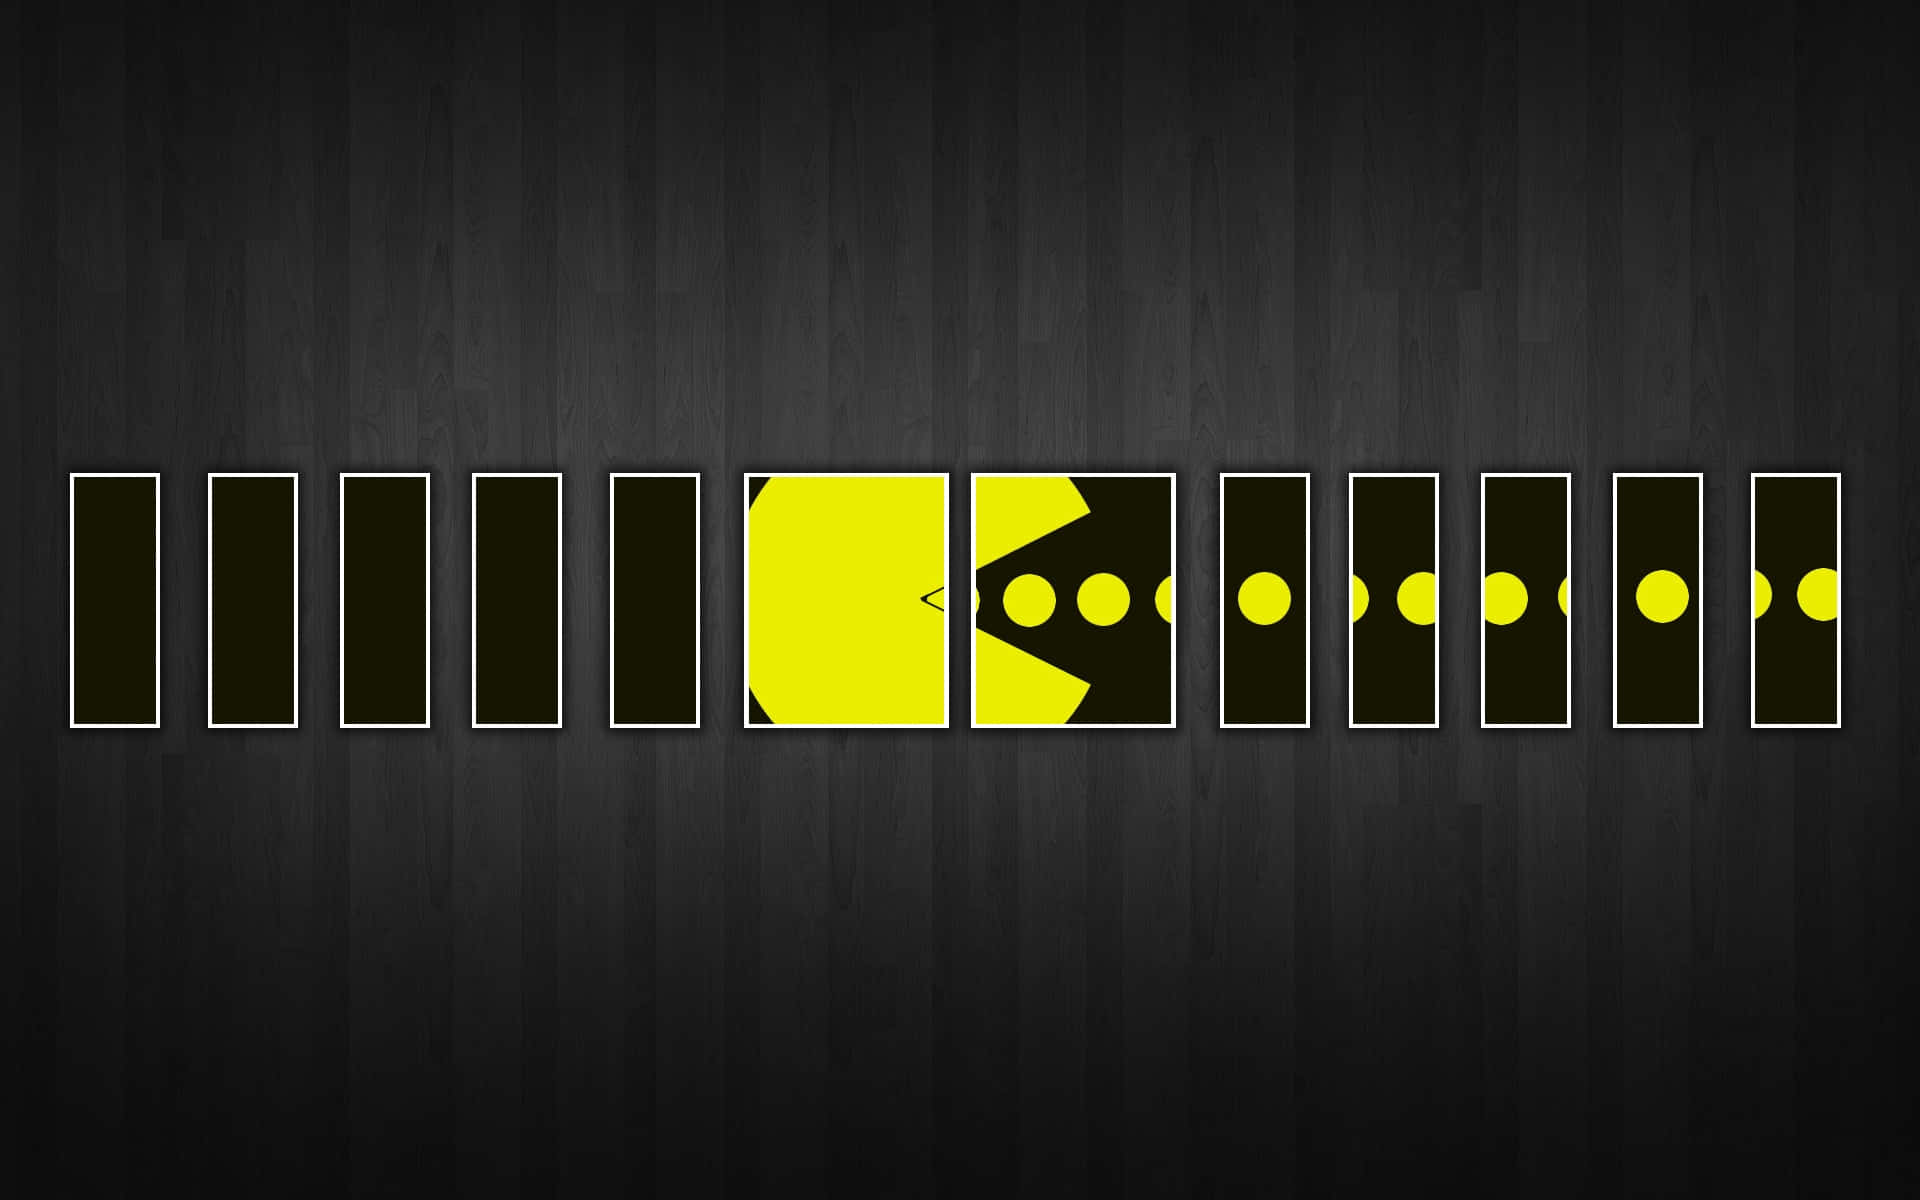 The classic Pac-Man game with an artistic twist in high resolution